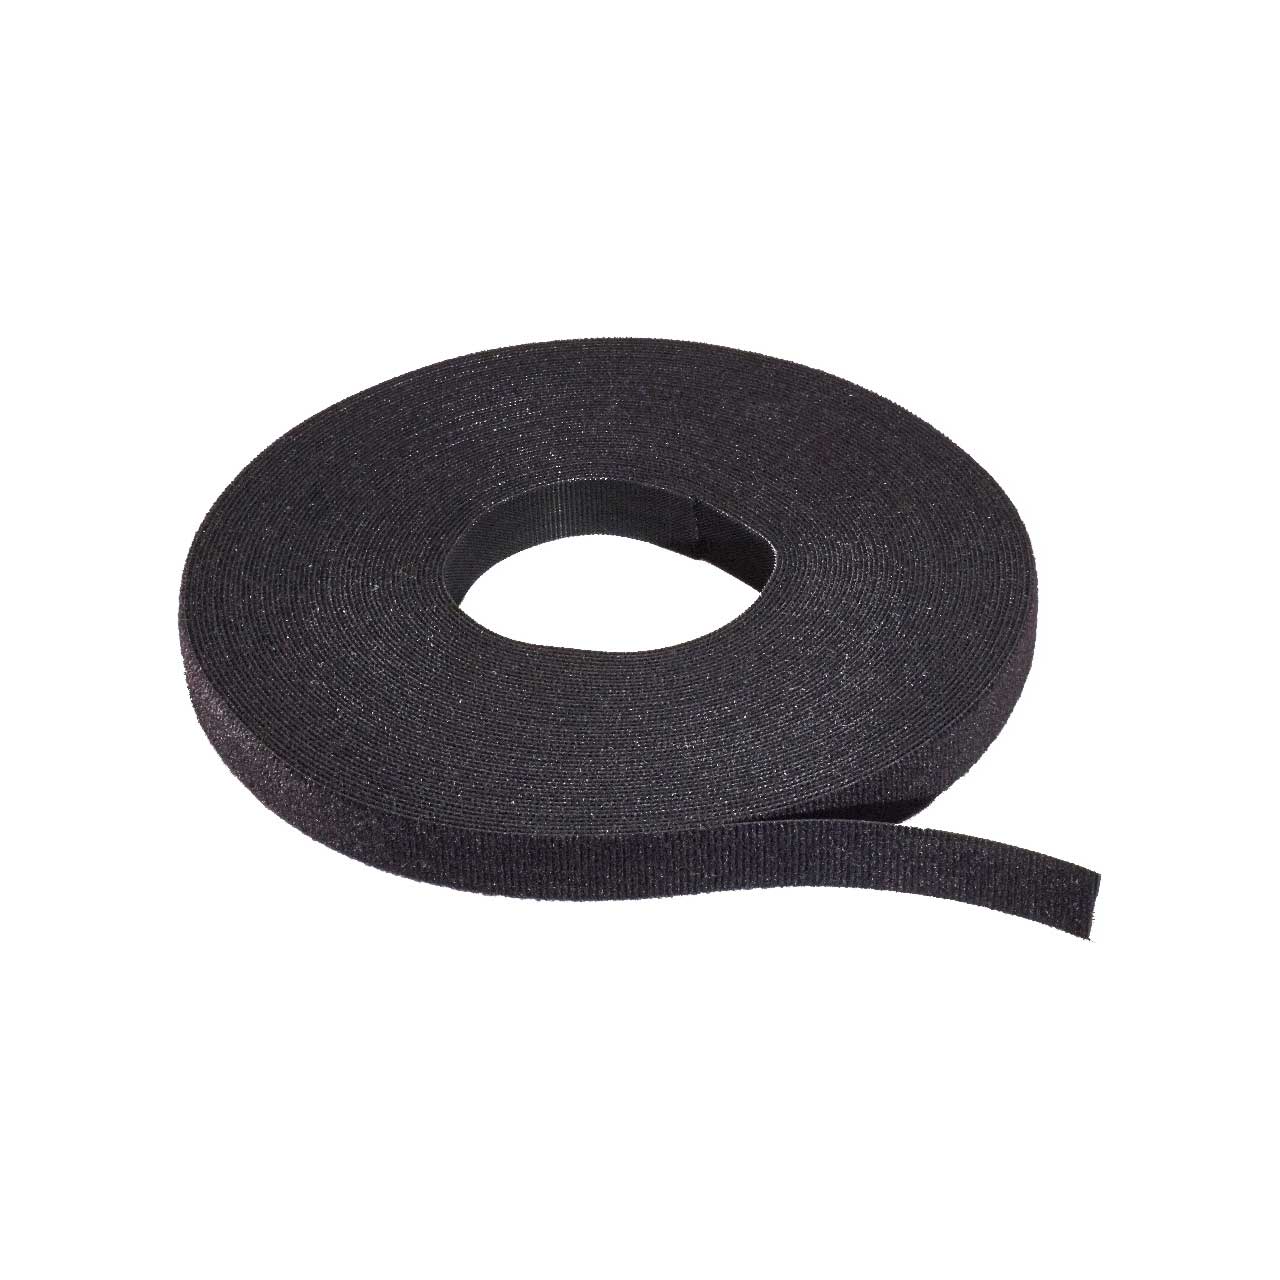 VELCRO Brand One Wrap Double-Sided Hook & Loop Tape - Black (By the Yard)